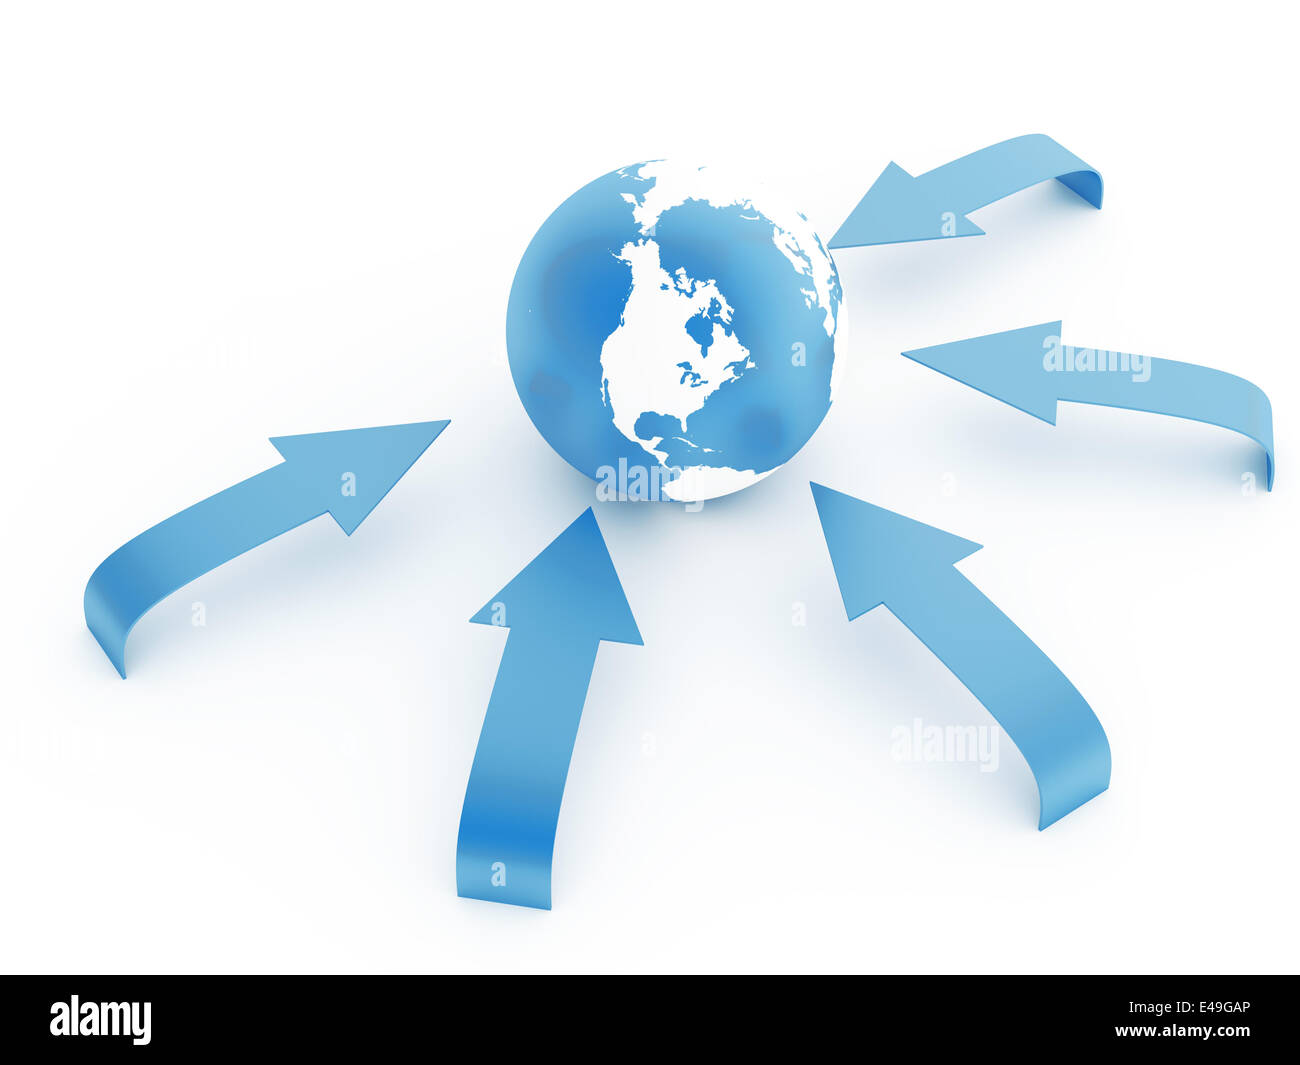 earth in an environment of blue arrows Stock Photo